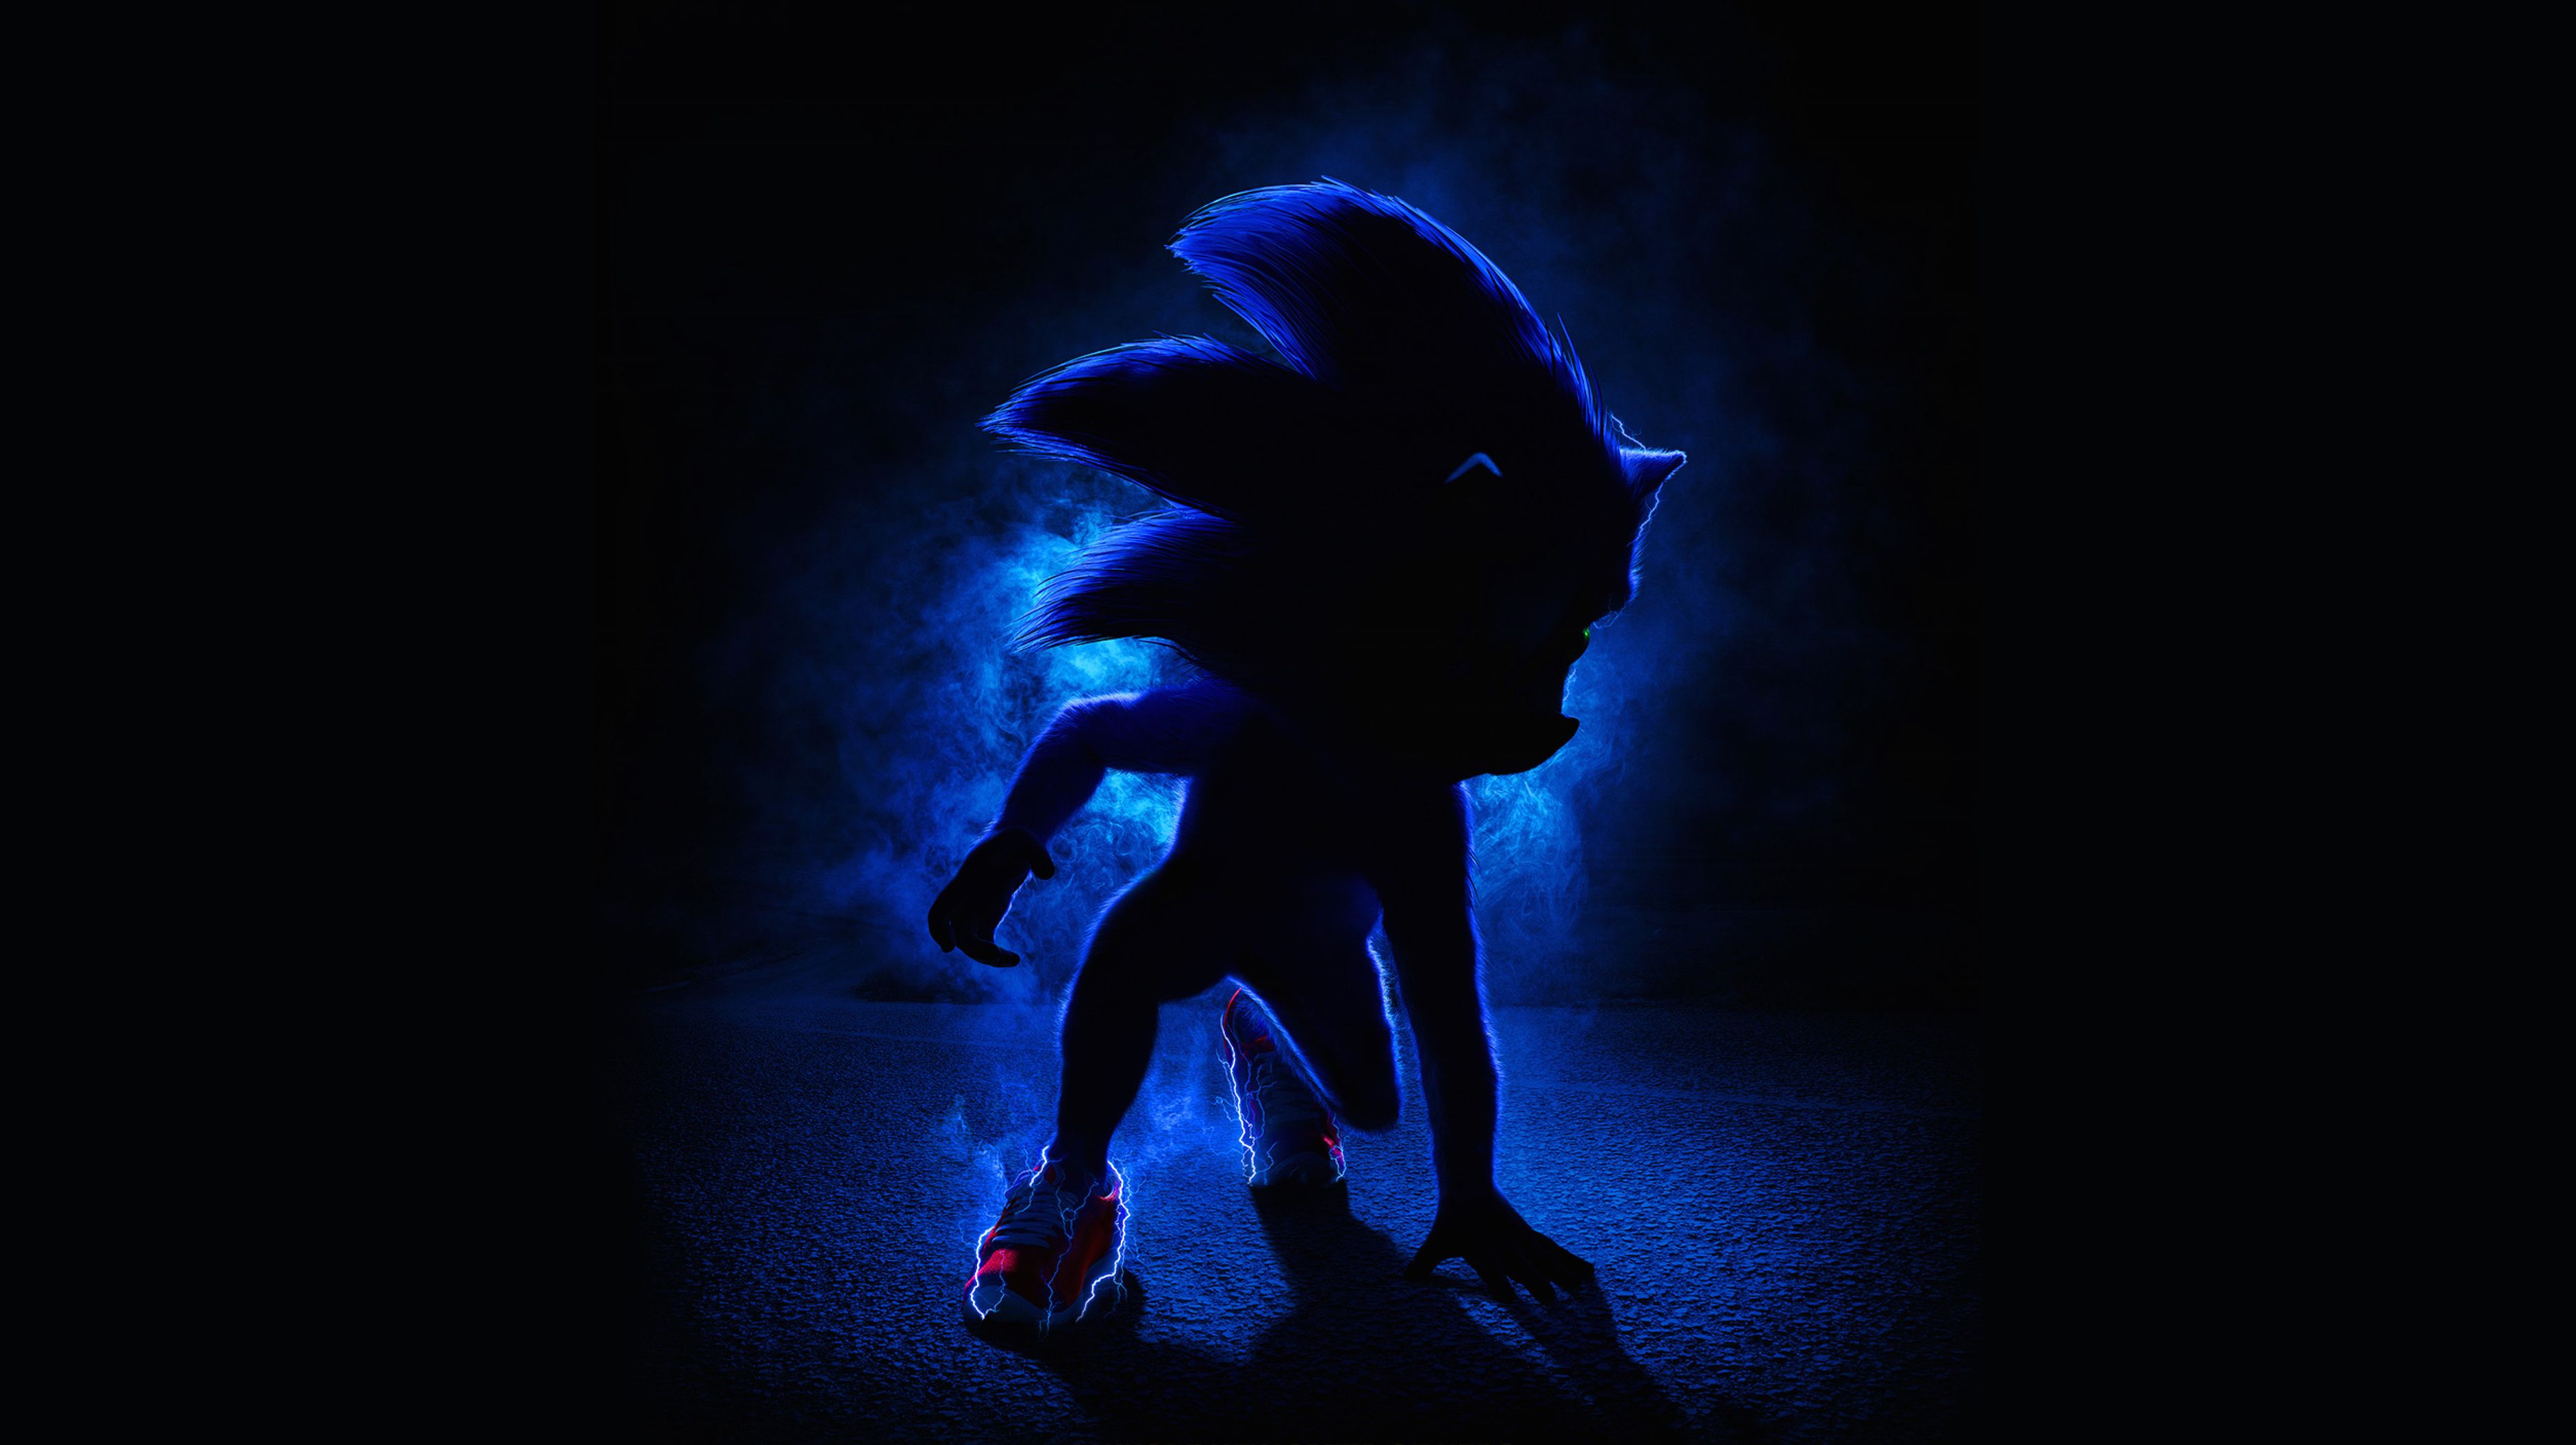 Sonic the Hedgehog 2019 Movie Poster Wallpaper, HD Movies 4K Wallpaper, Image, Photo and Background